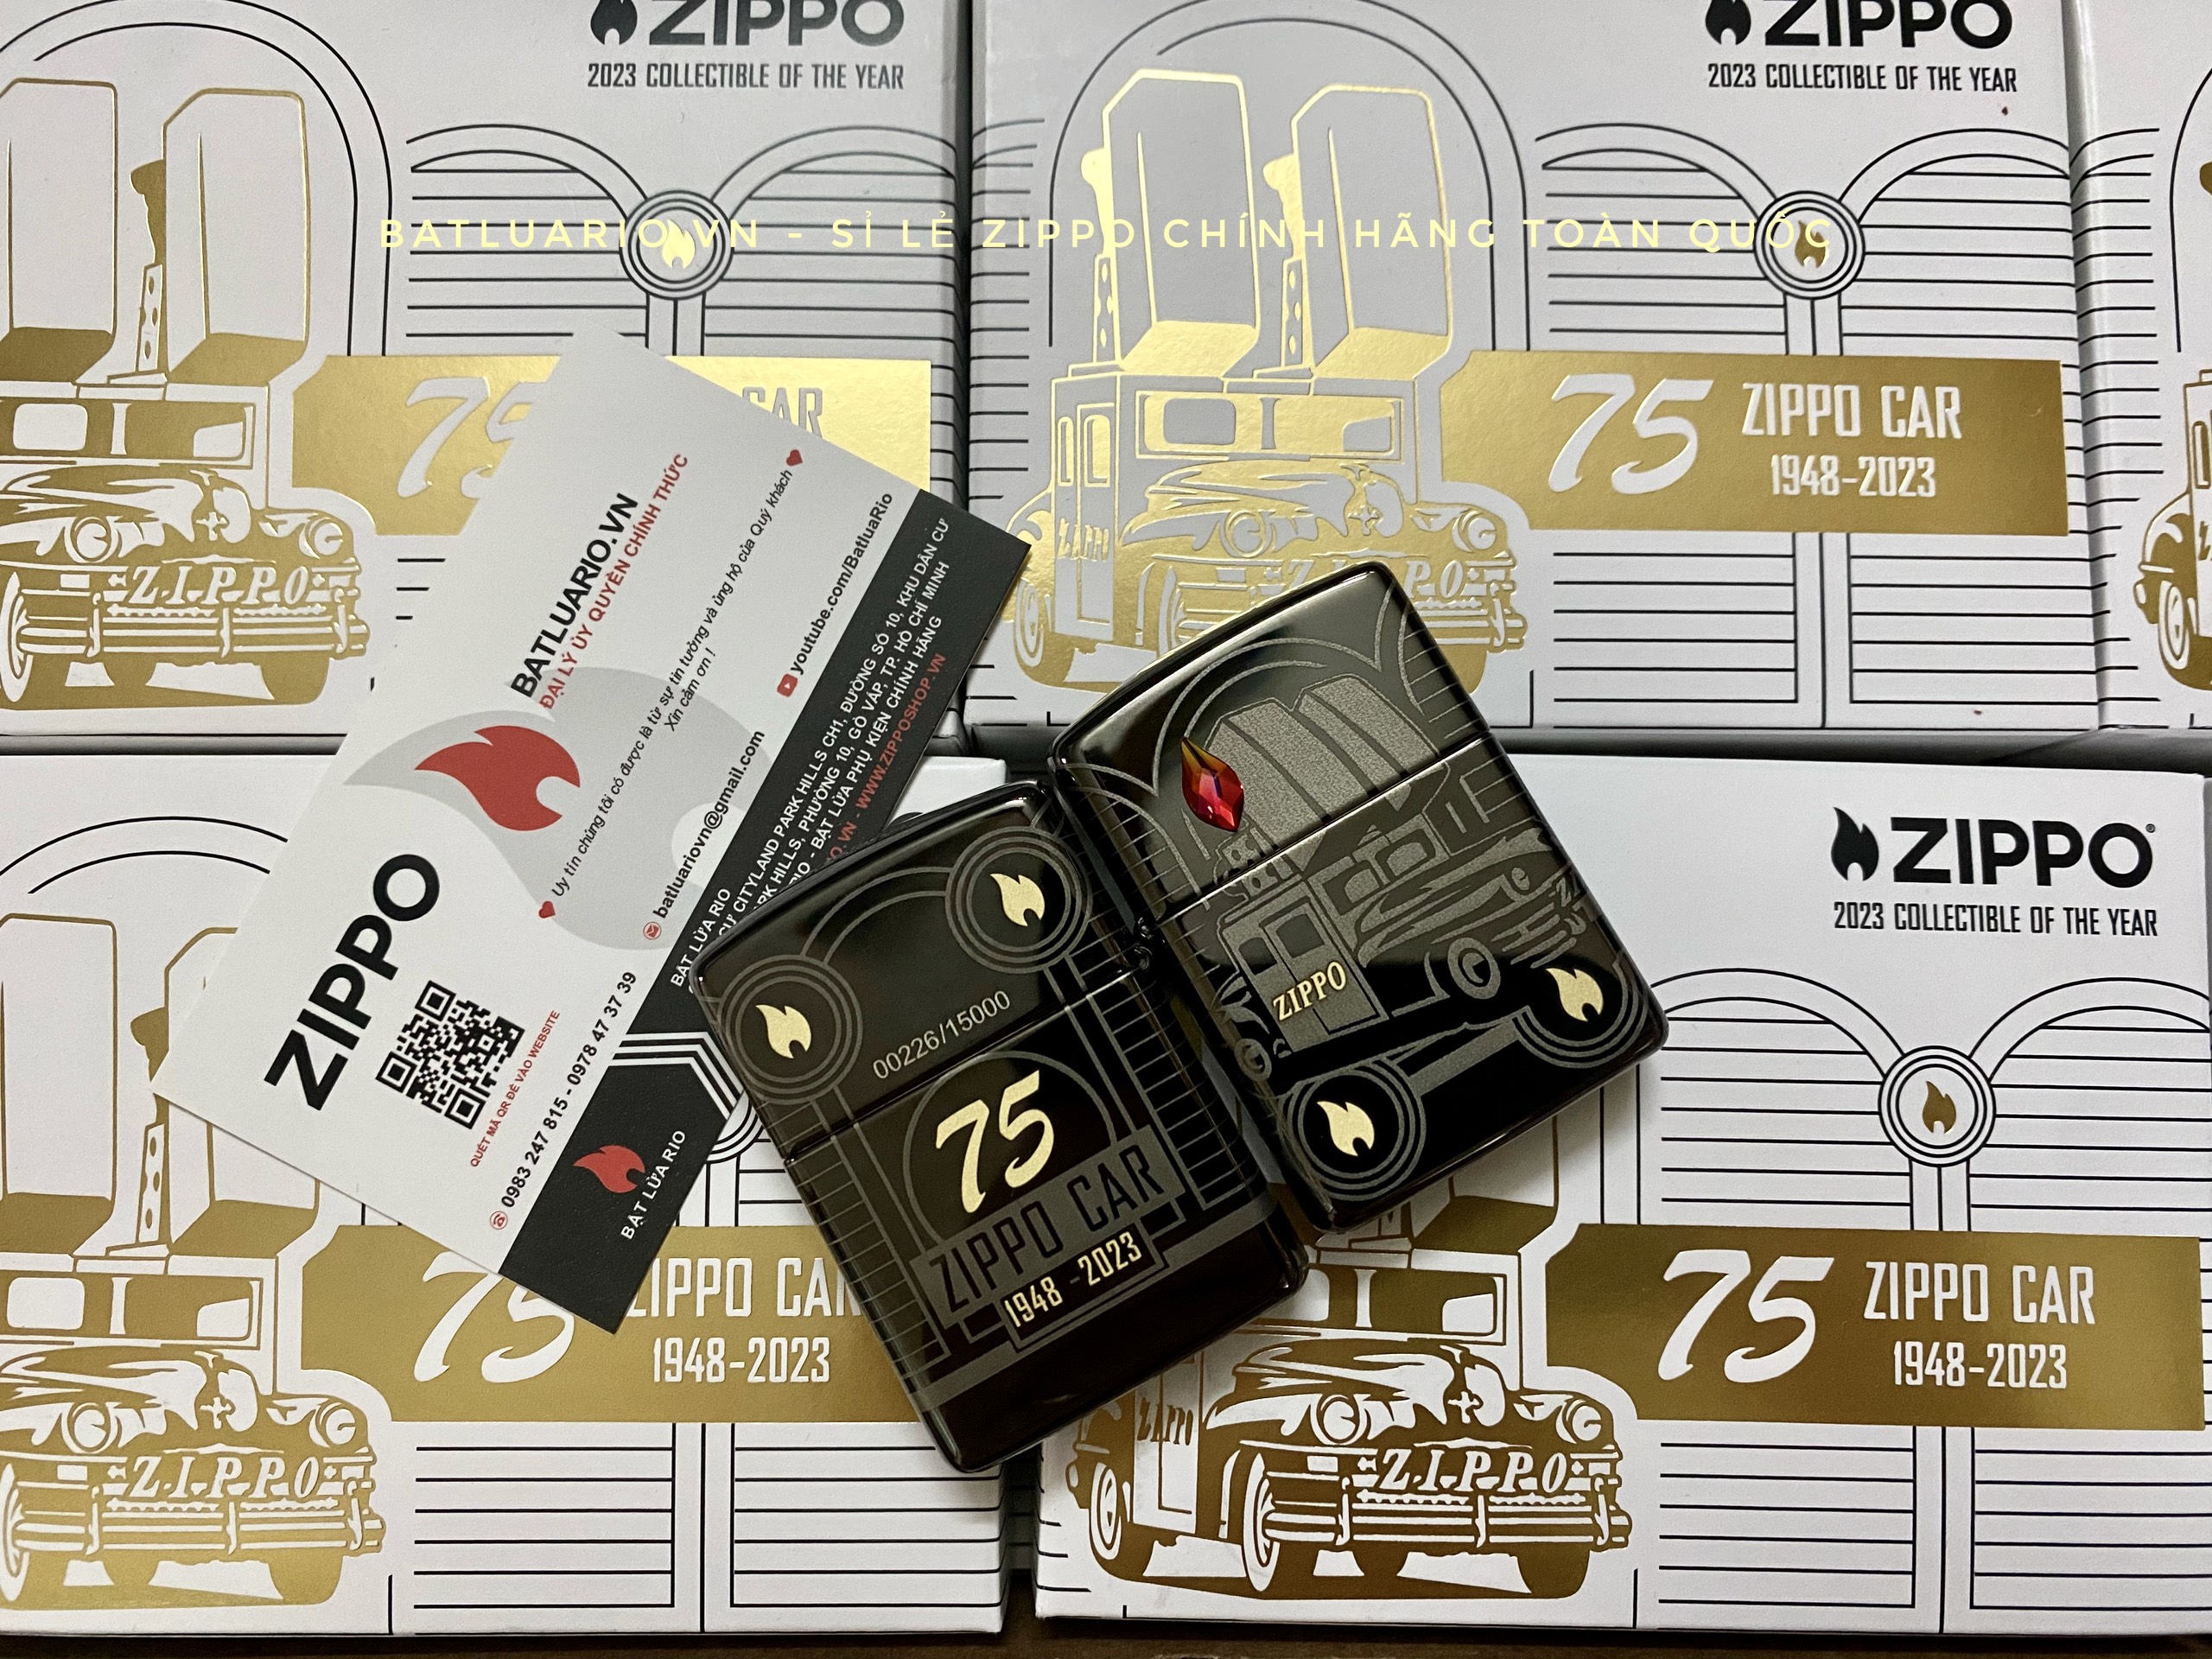 Zippo 48692 - Zippo 2023 Collectible Of The Year - Zippo Car 75th Anniversary Asia Pacific Limited Edition - Zippo COTY 2023 - Honoring 75 Years Of The Zippo Car 107